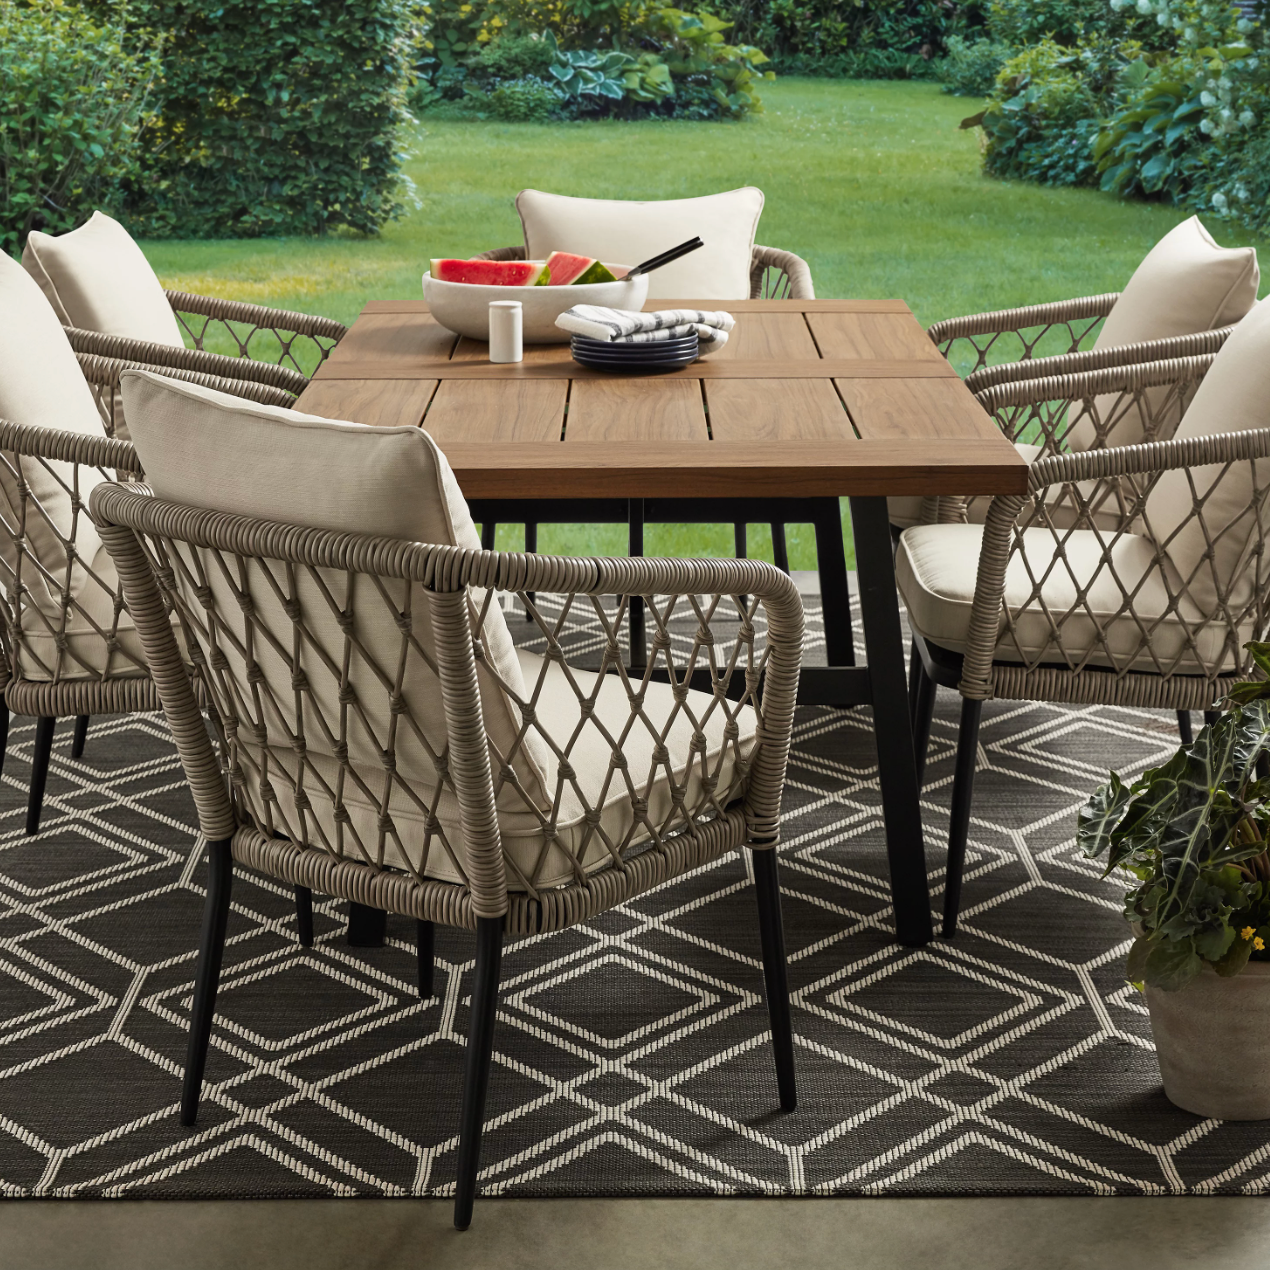 Better Homes & Gardens Kennedy Pointe Steel Outdoor Dining Set